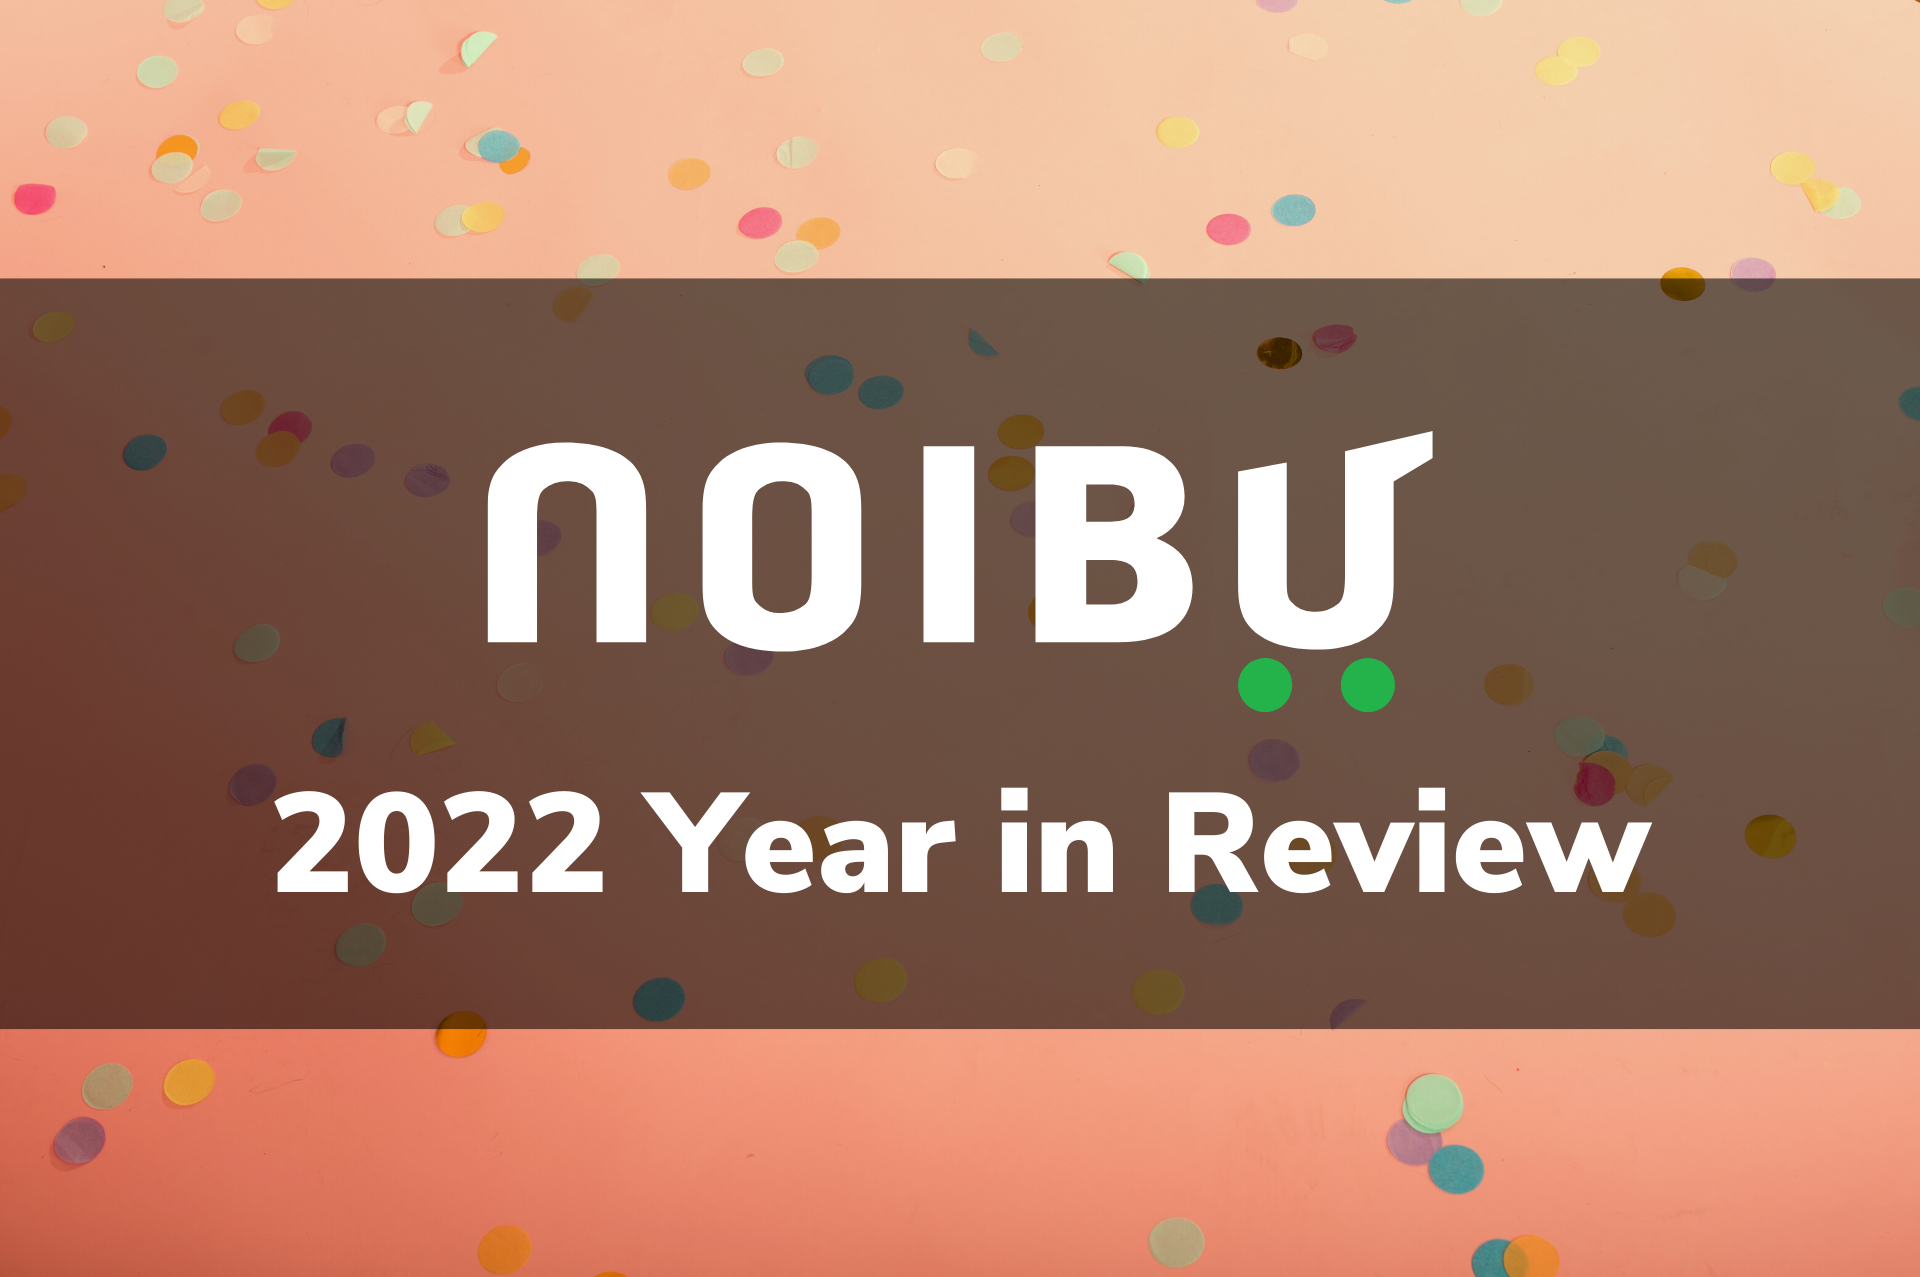 Noibu 2022 Year in Review - White text over peach-coloured background with multicoloured confetti